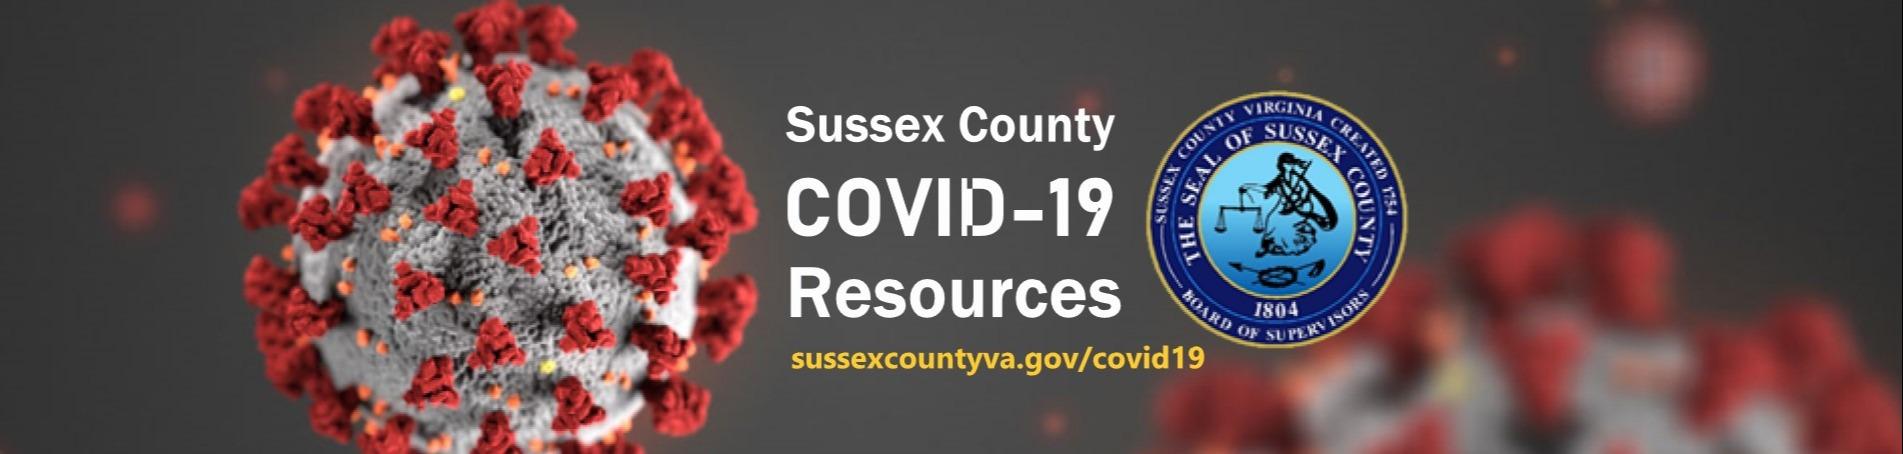 Sussex County, Virginia COVID-19 Resources Cover